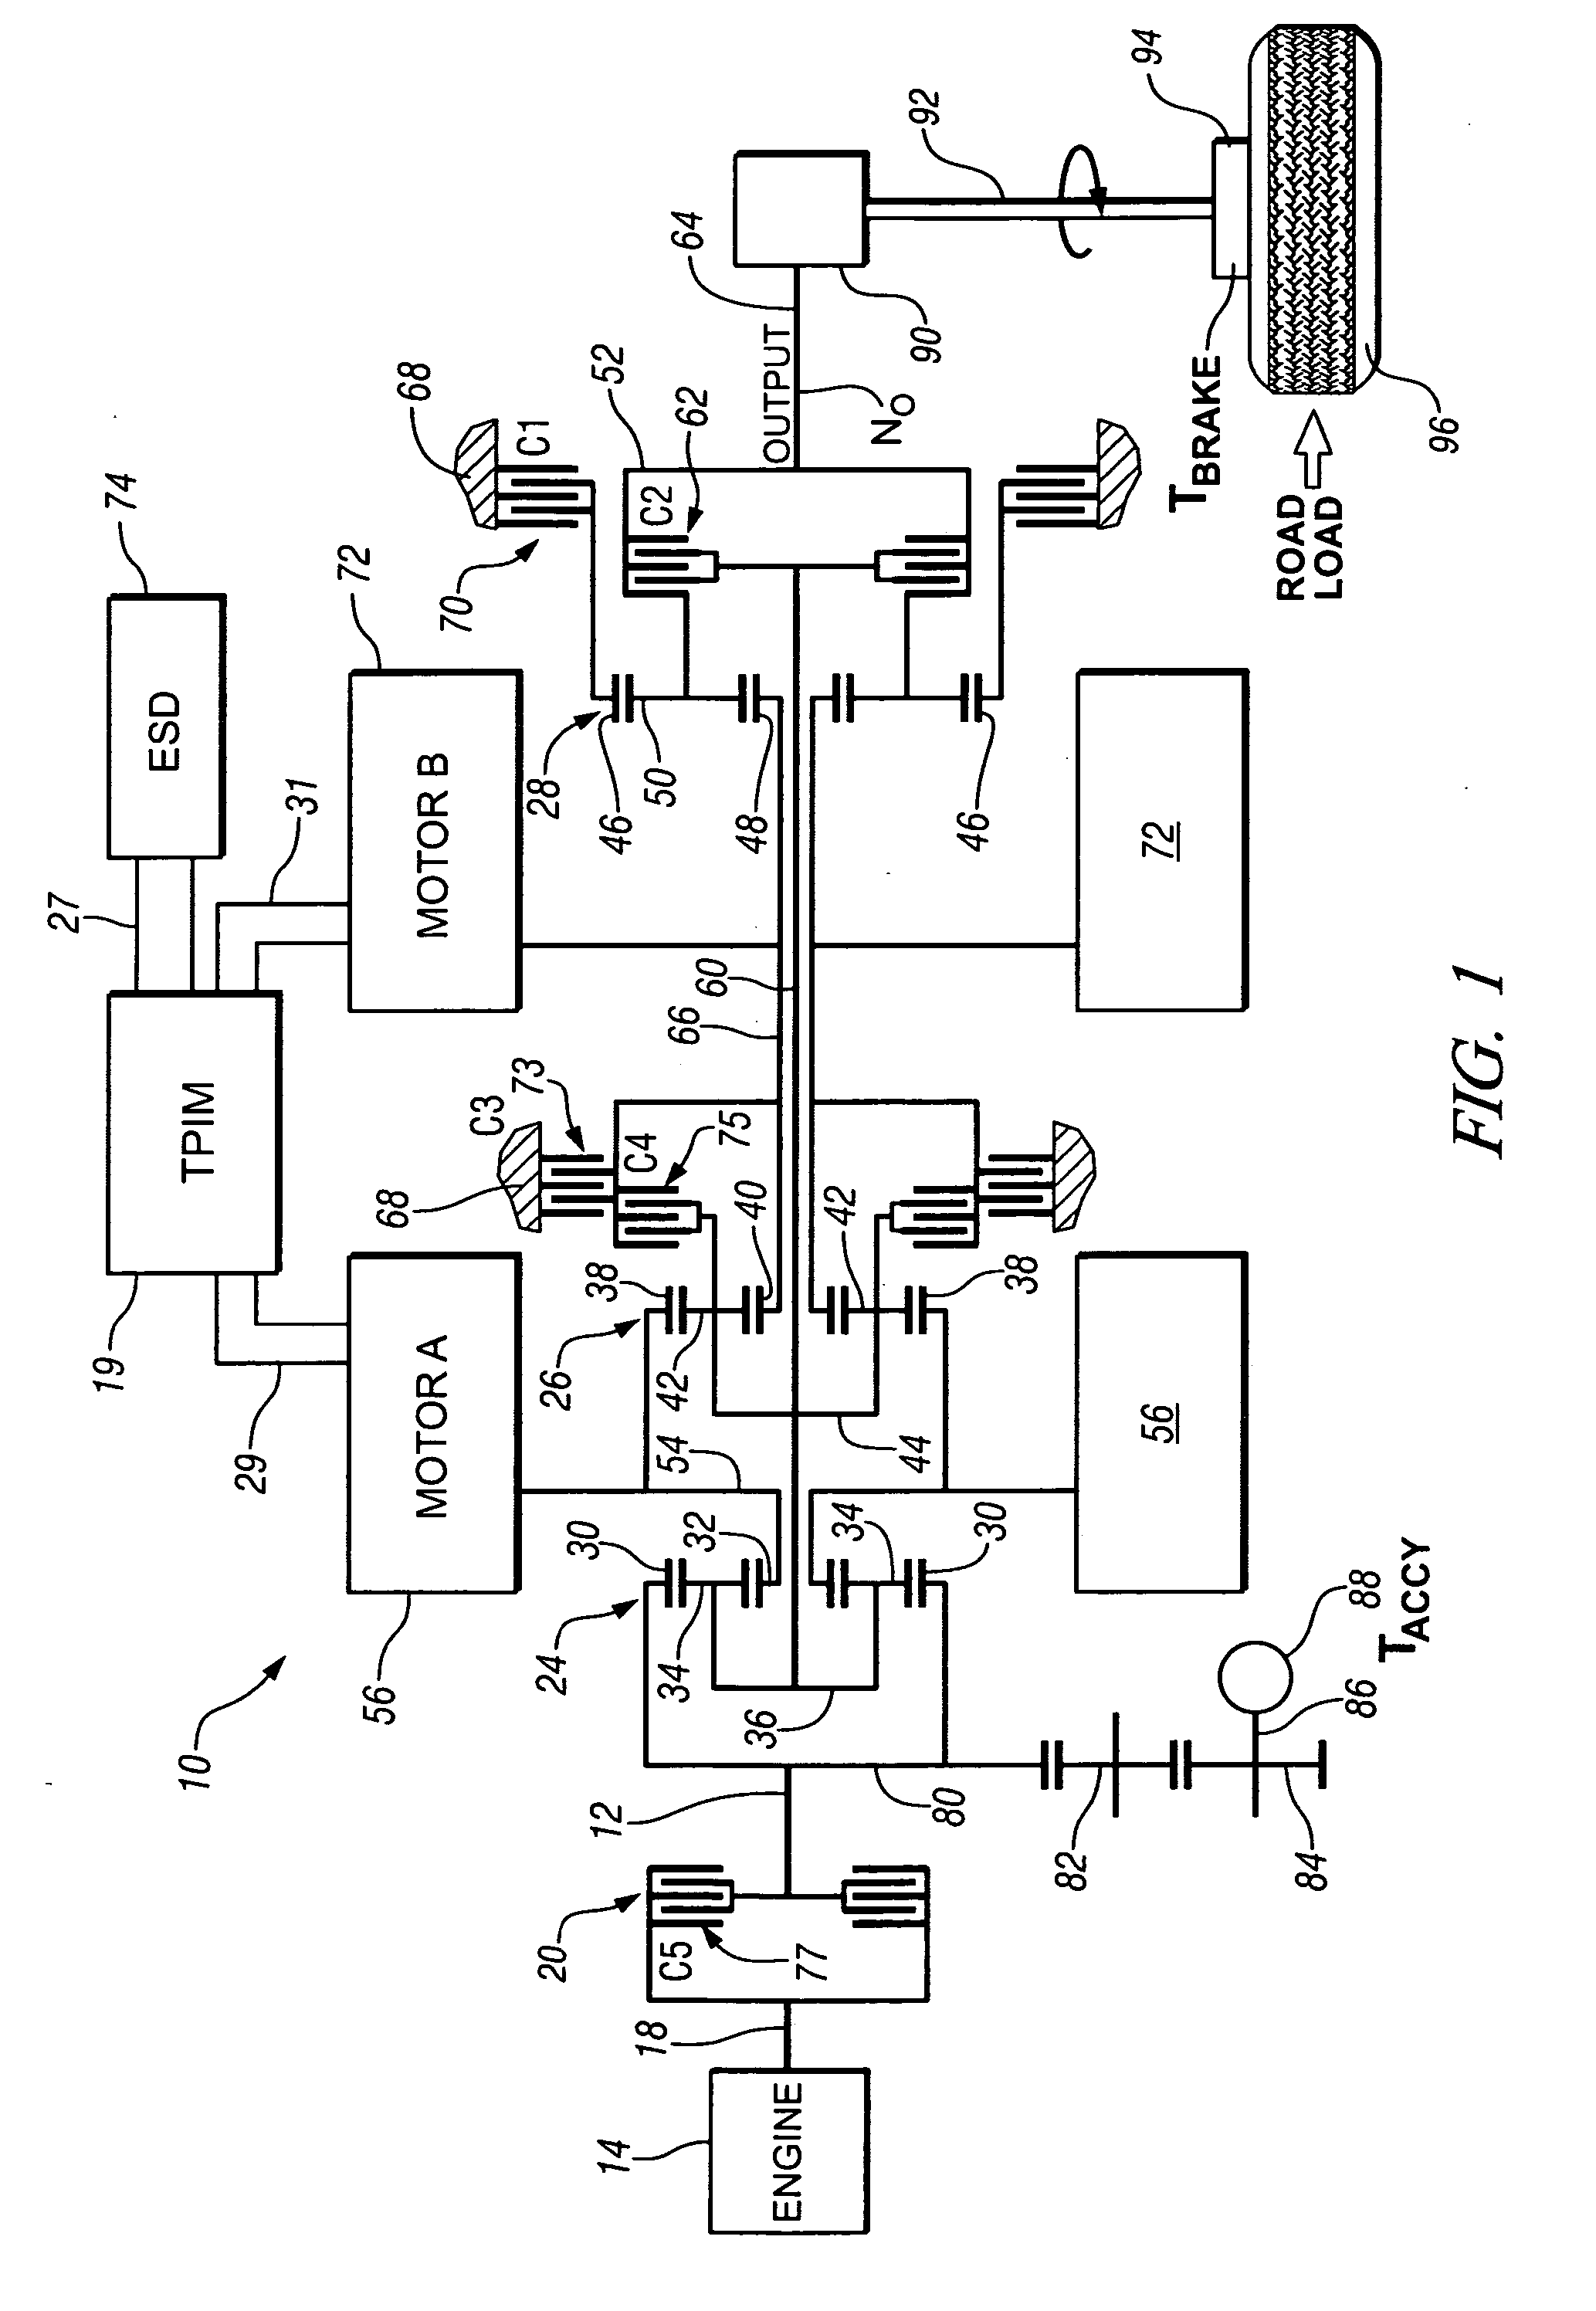 Synchronous shift execution for hybrid transmission